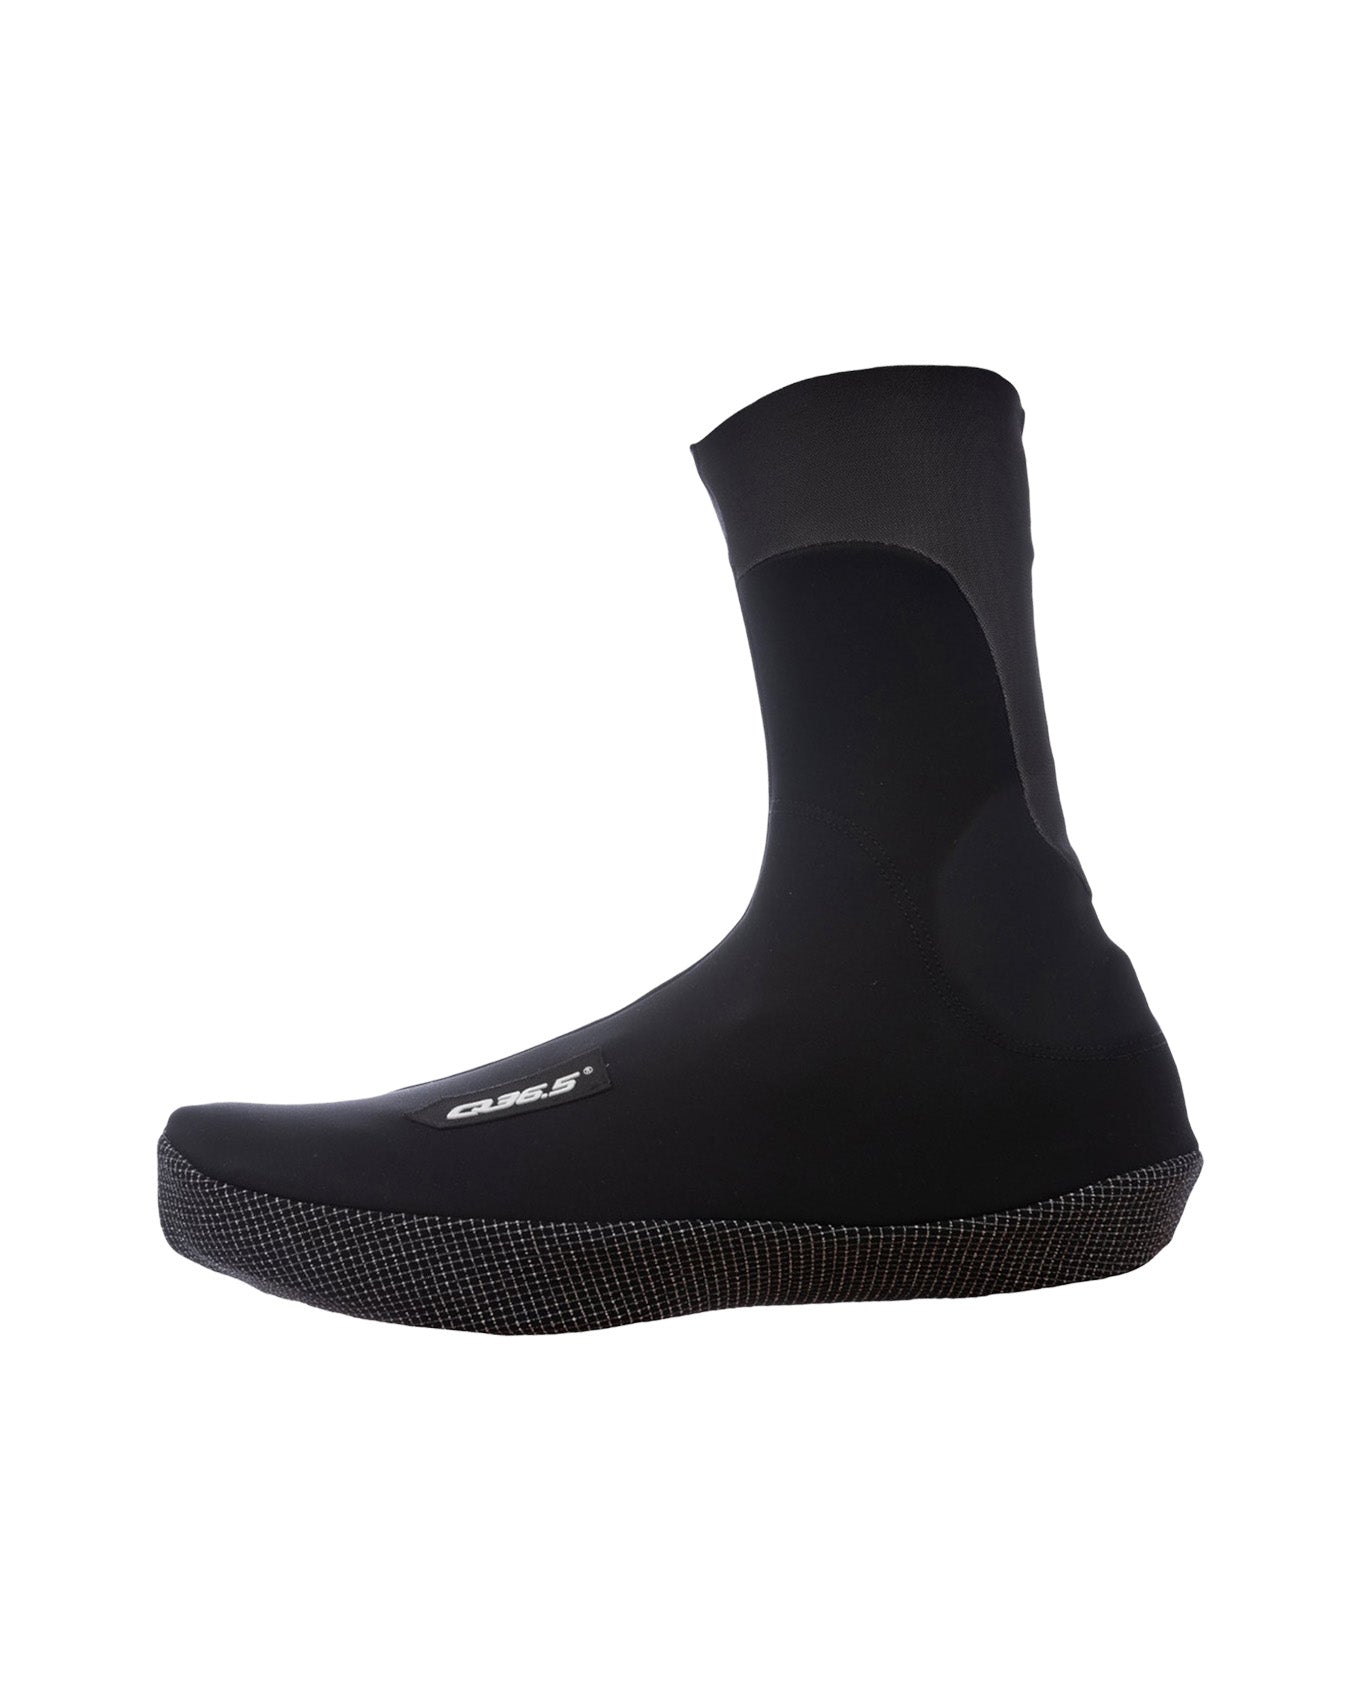 Super Termico Winter Overshoes